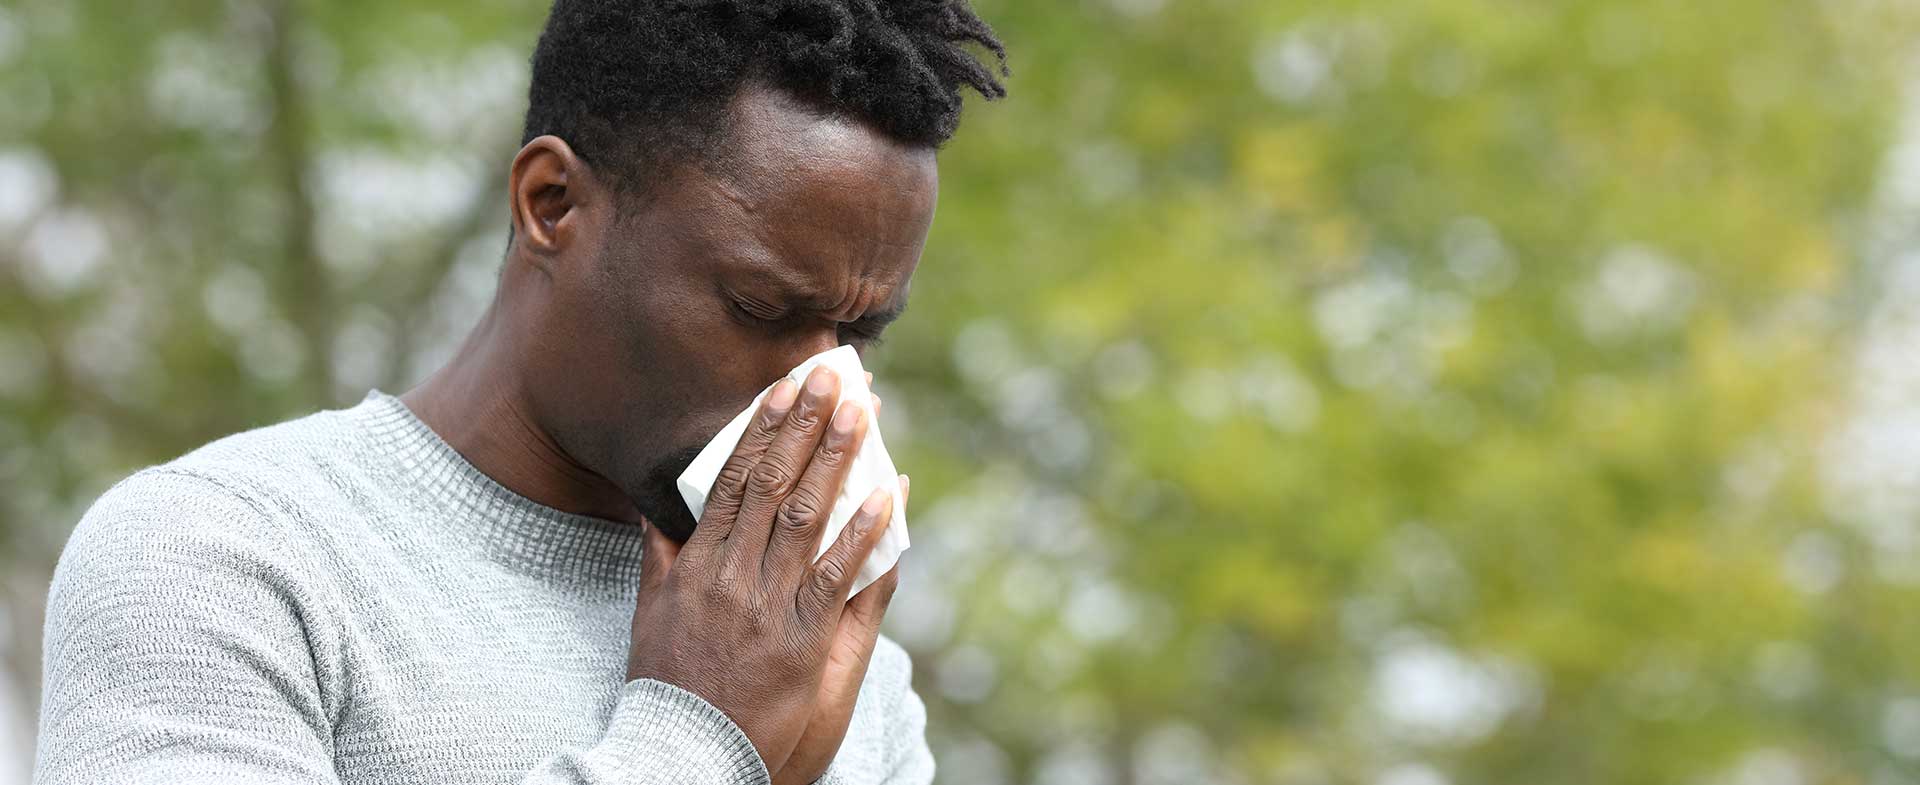 man blowing nose outside